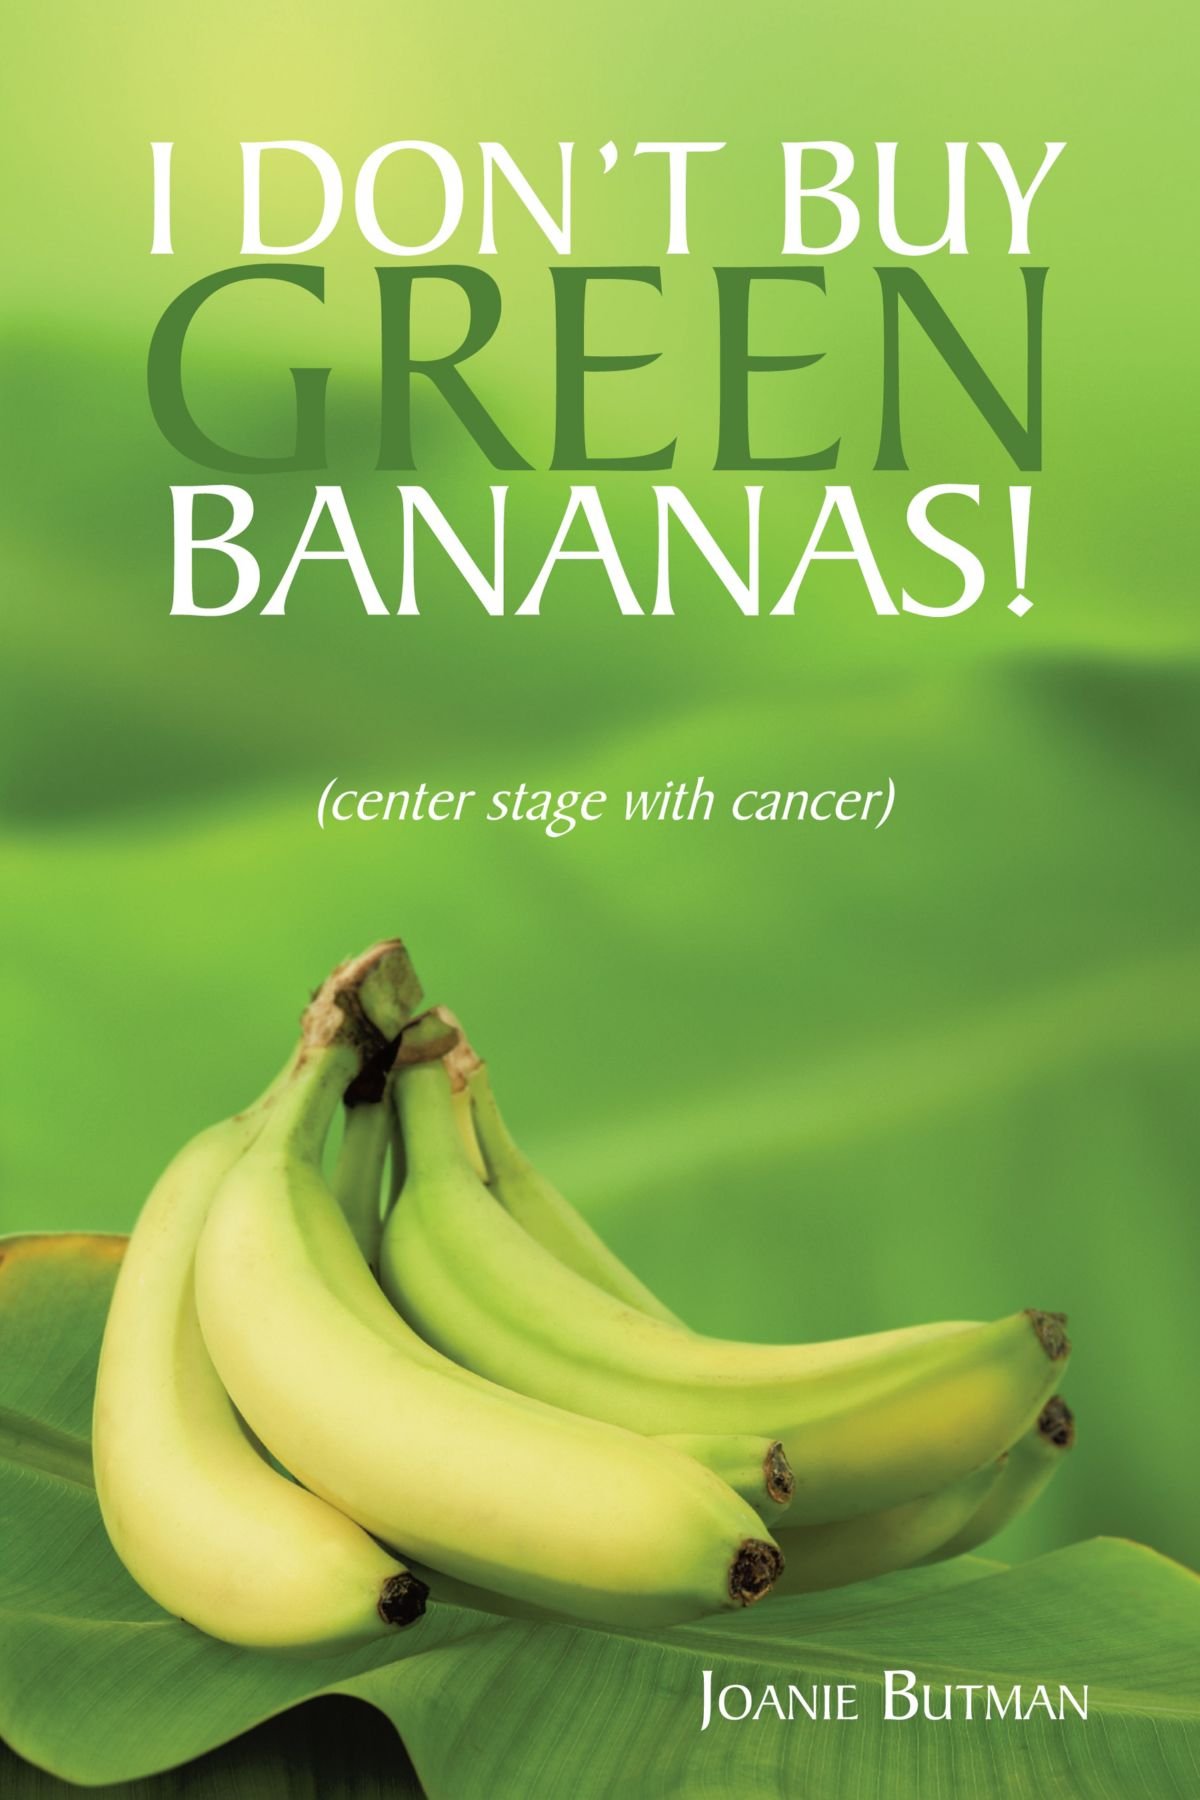 I Don't Buy Green Bananas!: Center stage with cancer: Joanie Butman ...